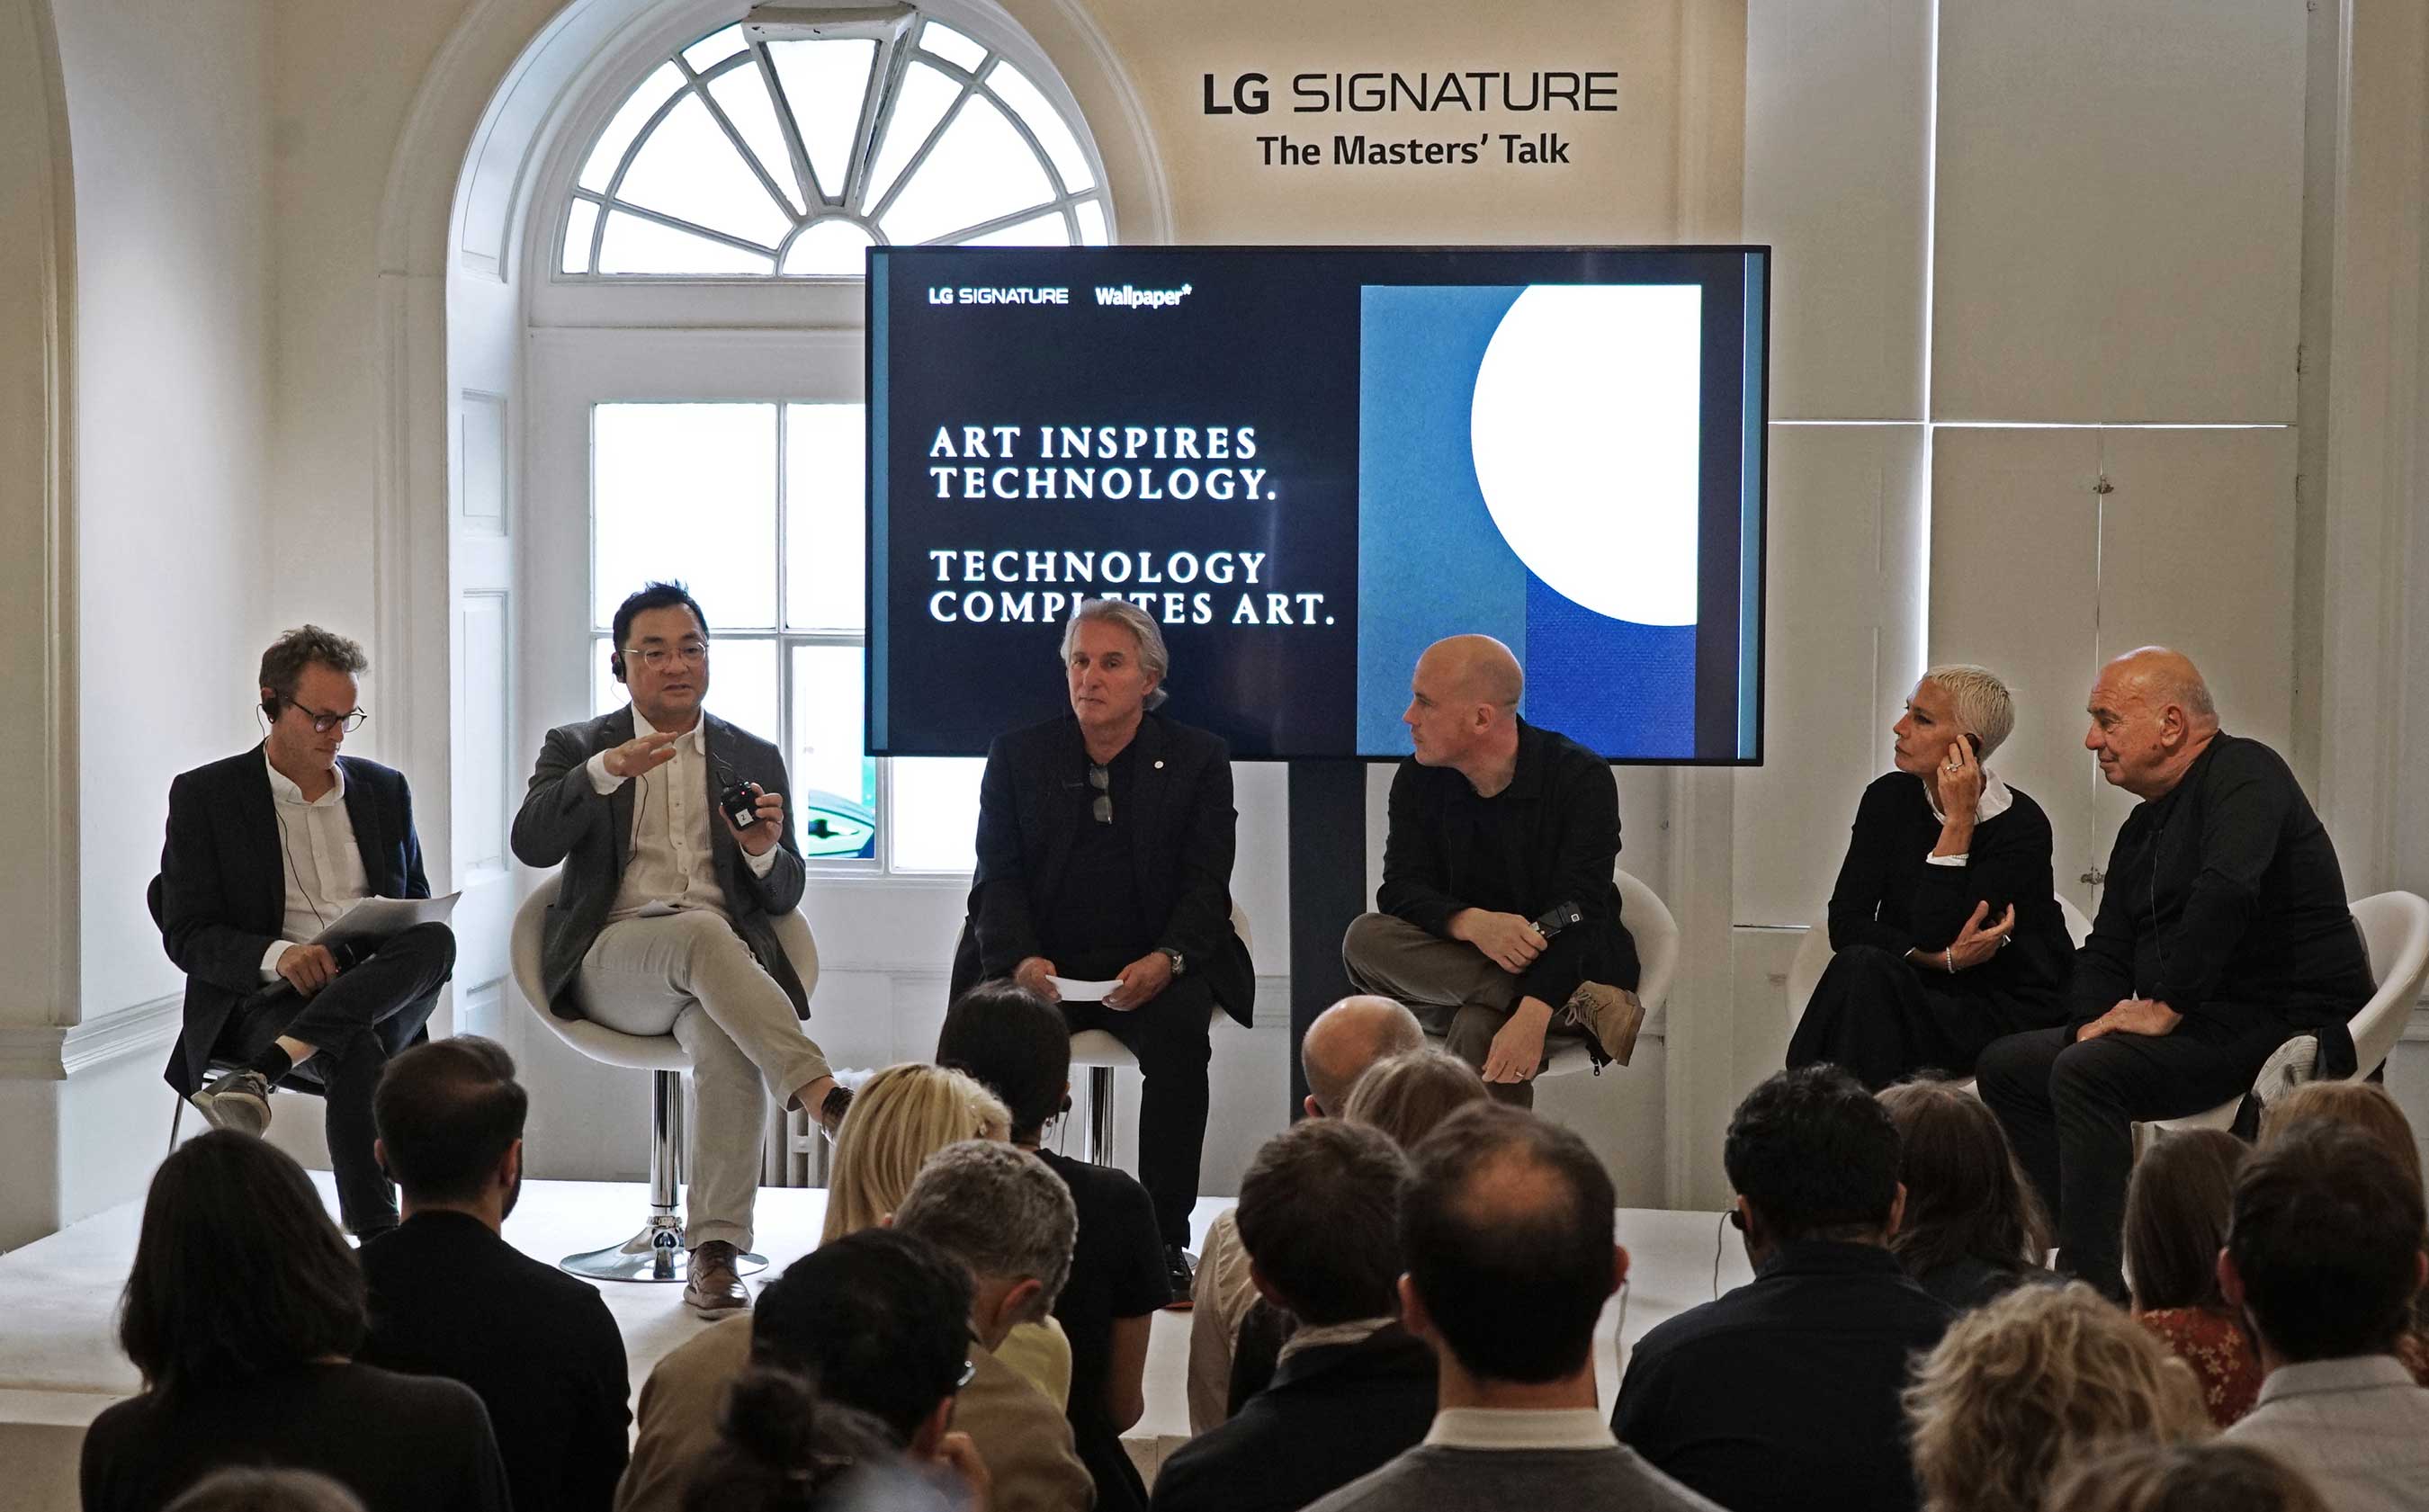 LG SIGNATURE Showcases Premium Blend Of Art And Technology In The Heart Of London